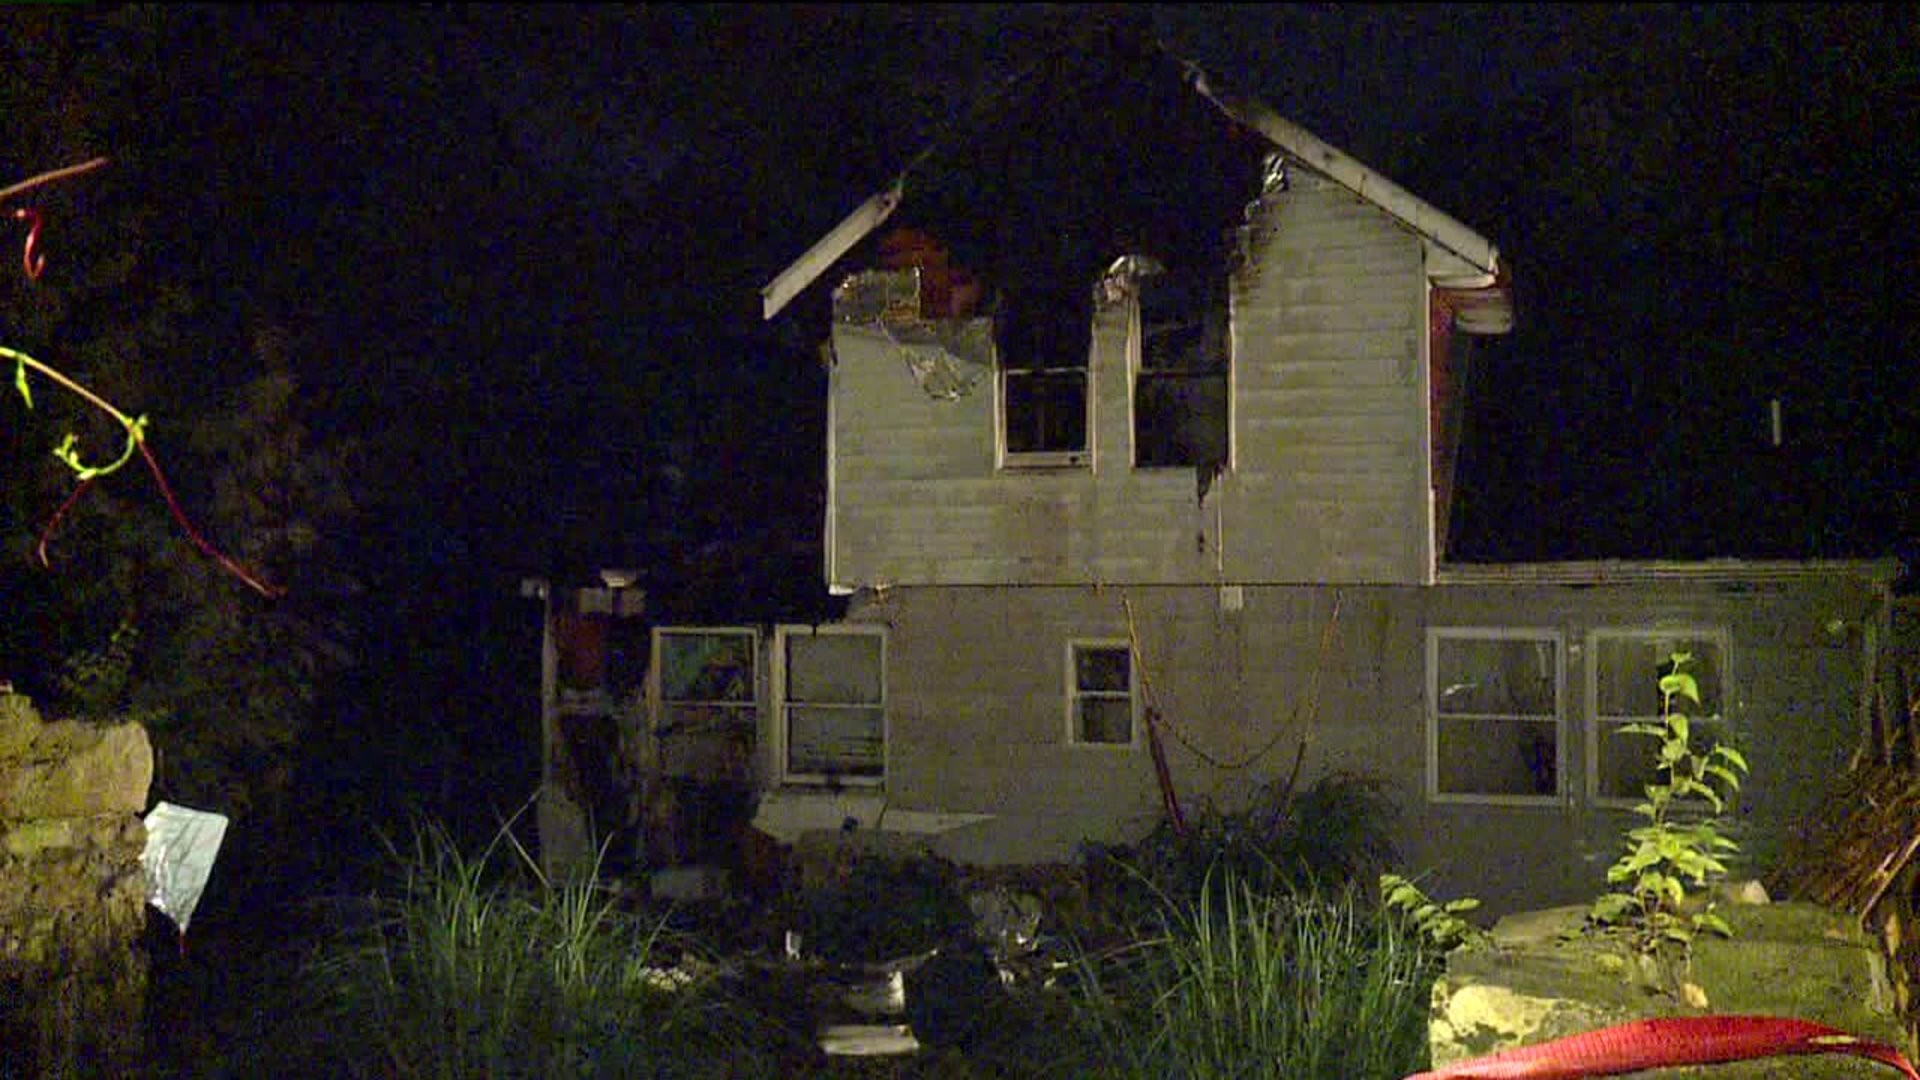 Fire Damages Home After Flames Rekindle in Luzerne County